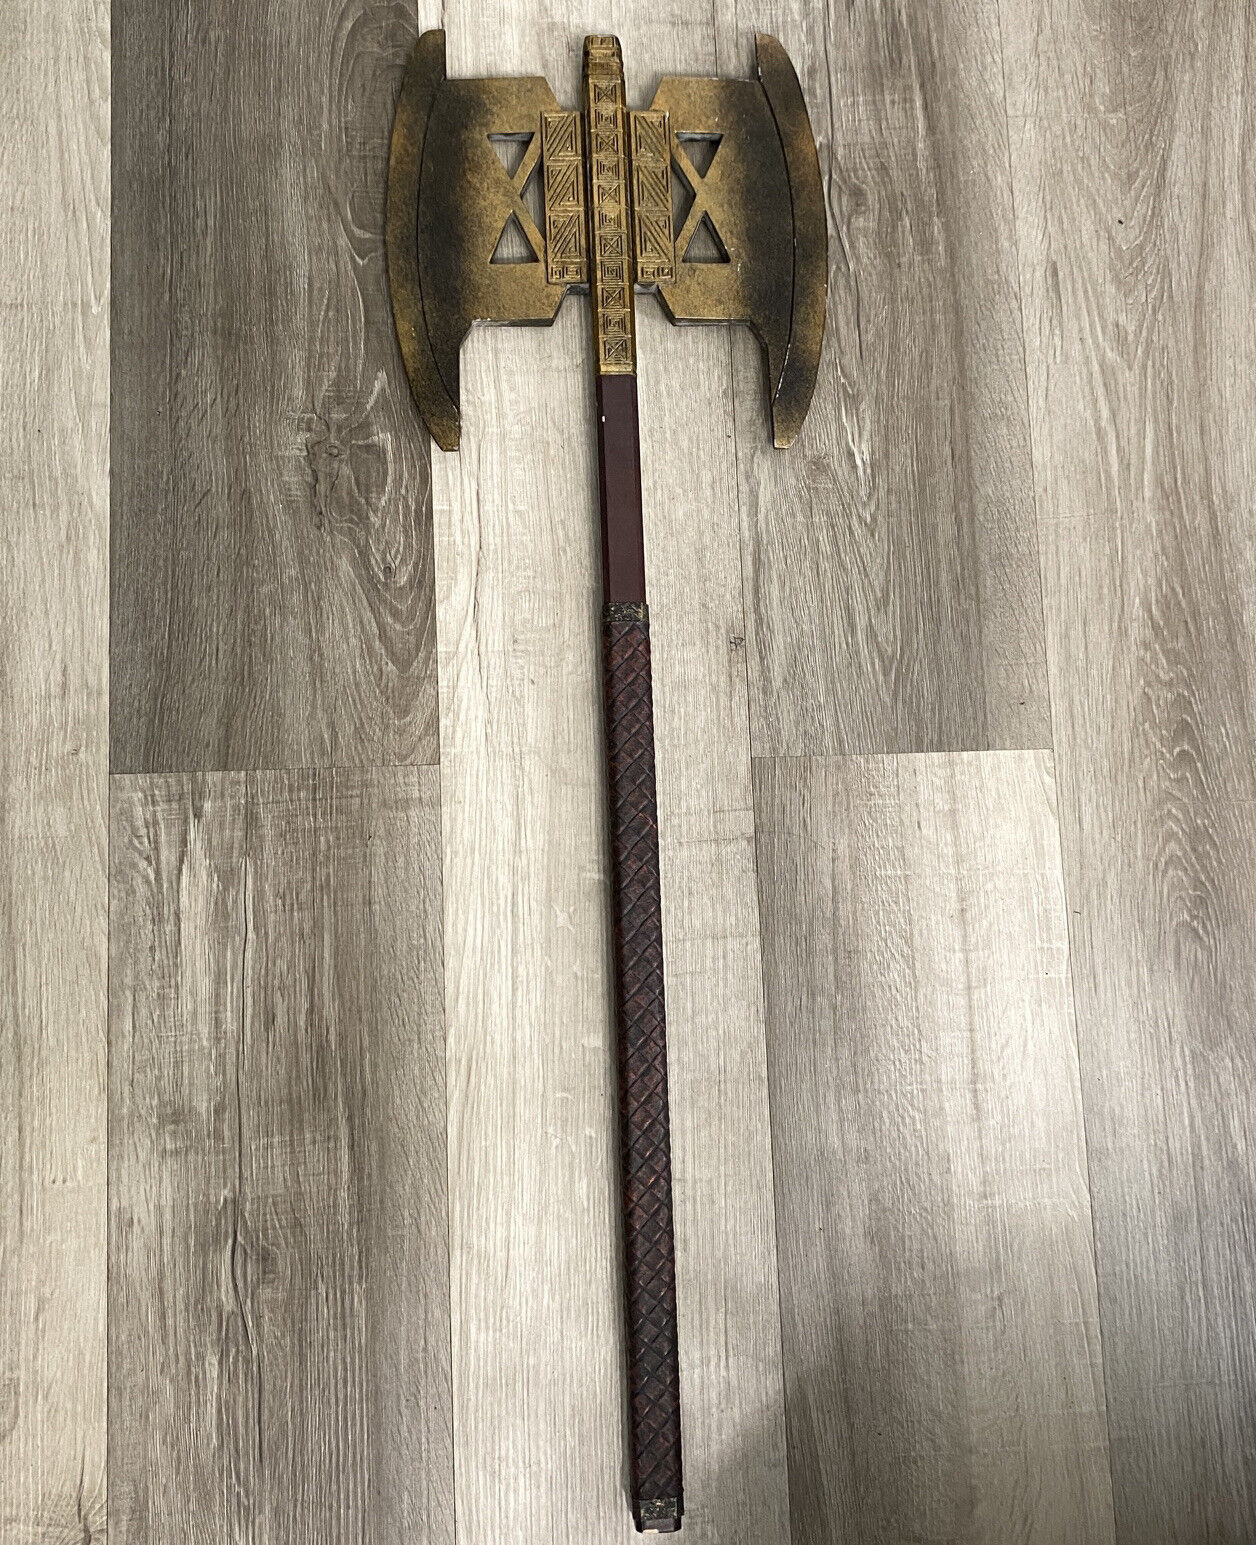 Gimli's Battle Axe Official Lord of the Rings Collectible 2001 Replica Display